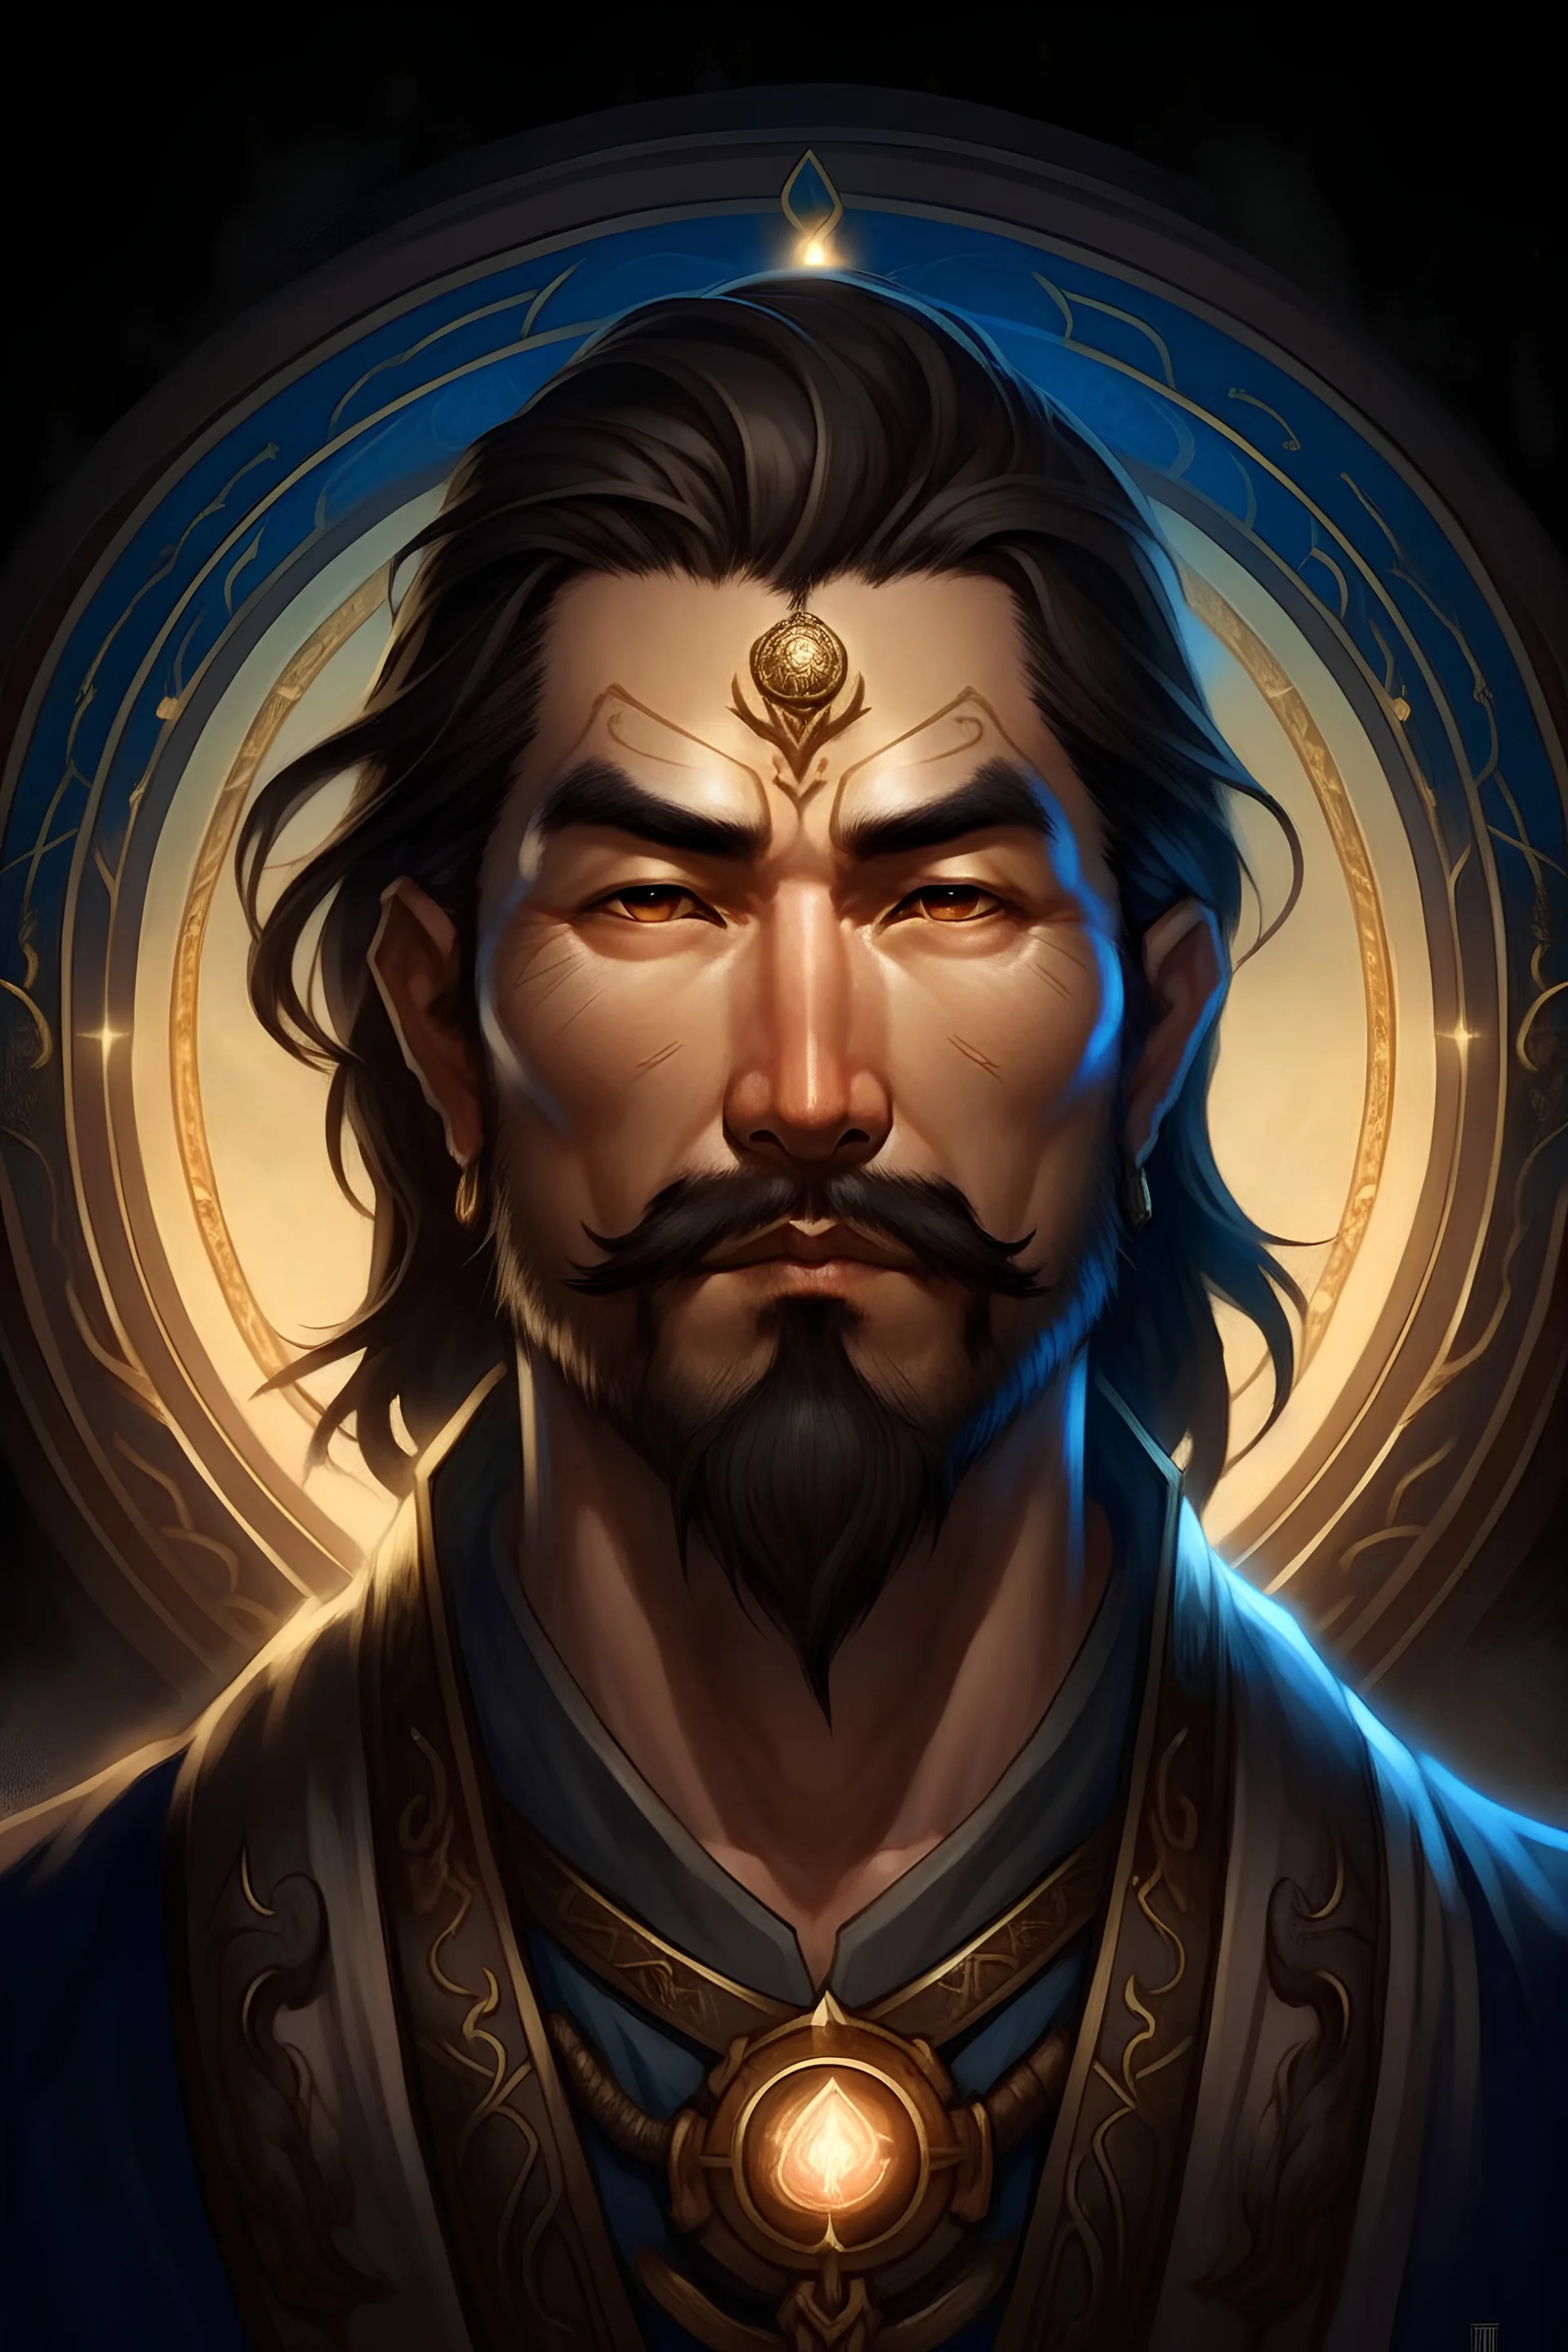 Generate a dungeons and dragons character portrait of the face of a male cleric of peace aasimar that looks like a asian man with scant facial hair blessed by the goddess Selune. He has black hair and glowing eyes and is surrounded by holy light, with a tatooed moon on the forehead